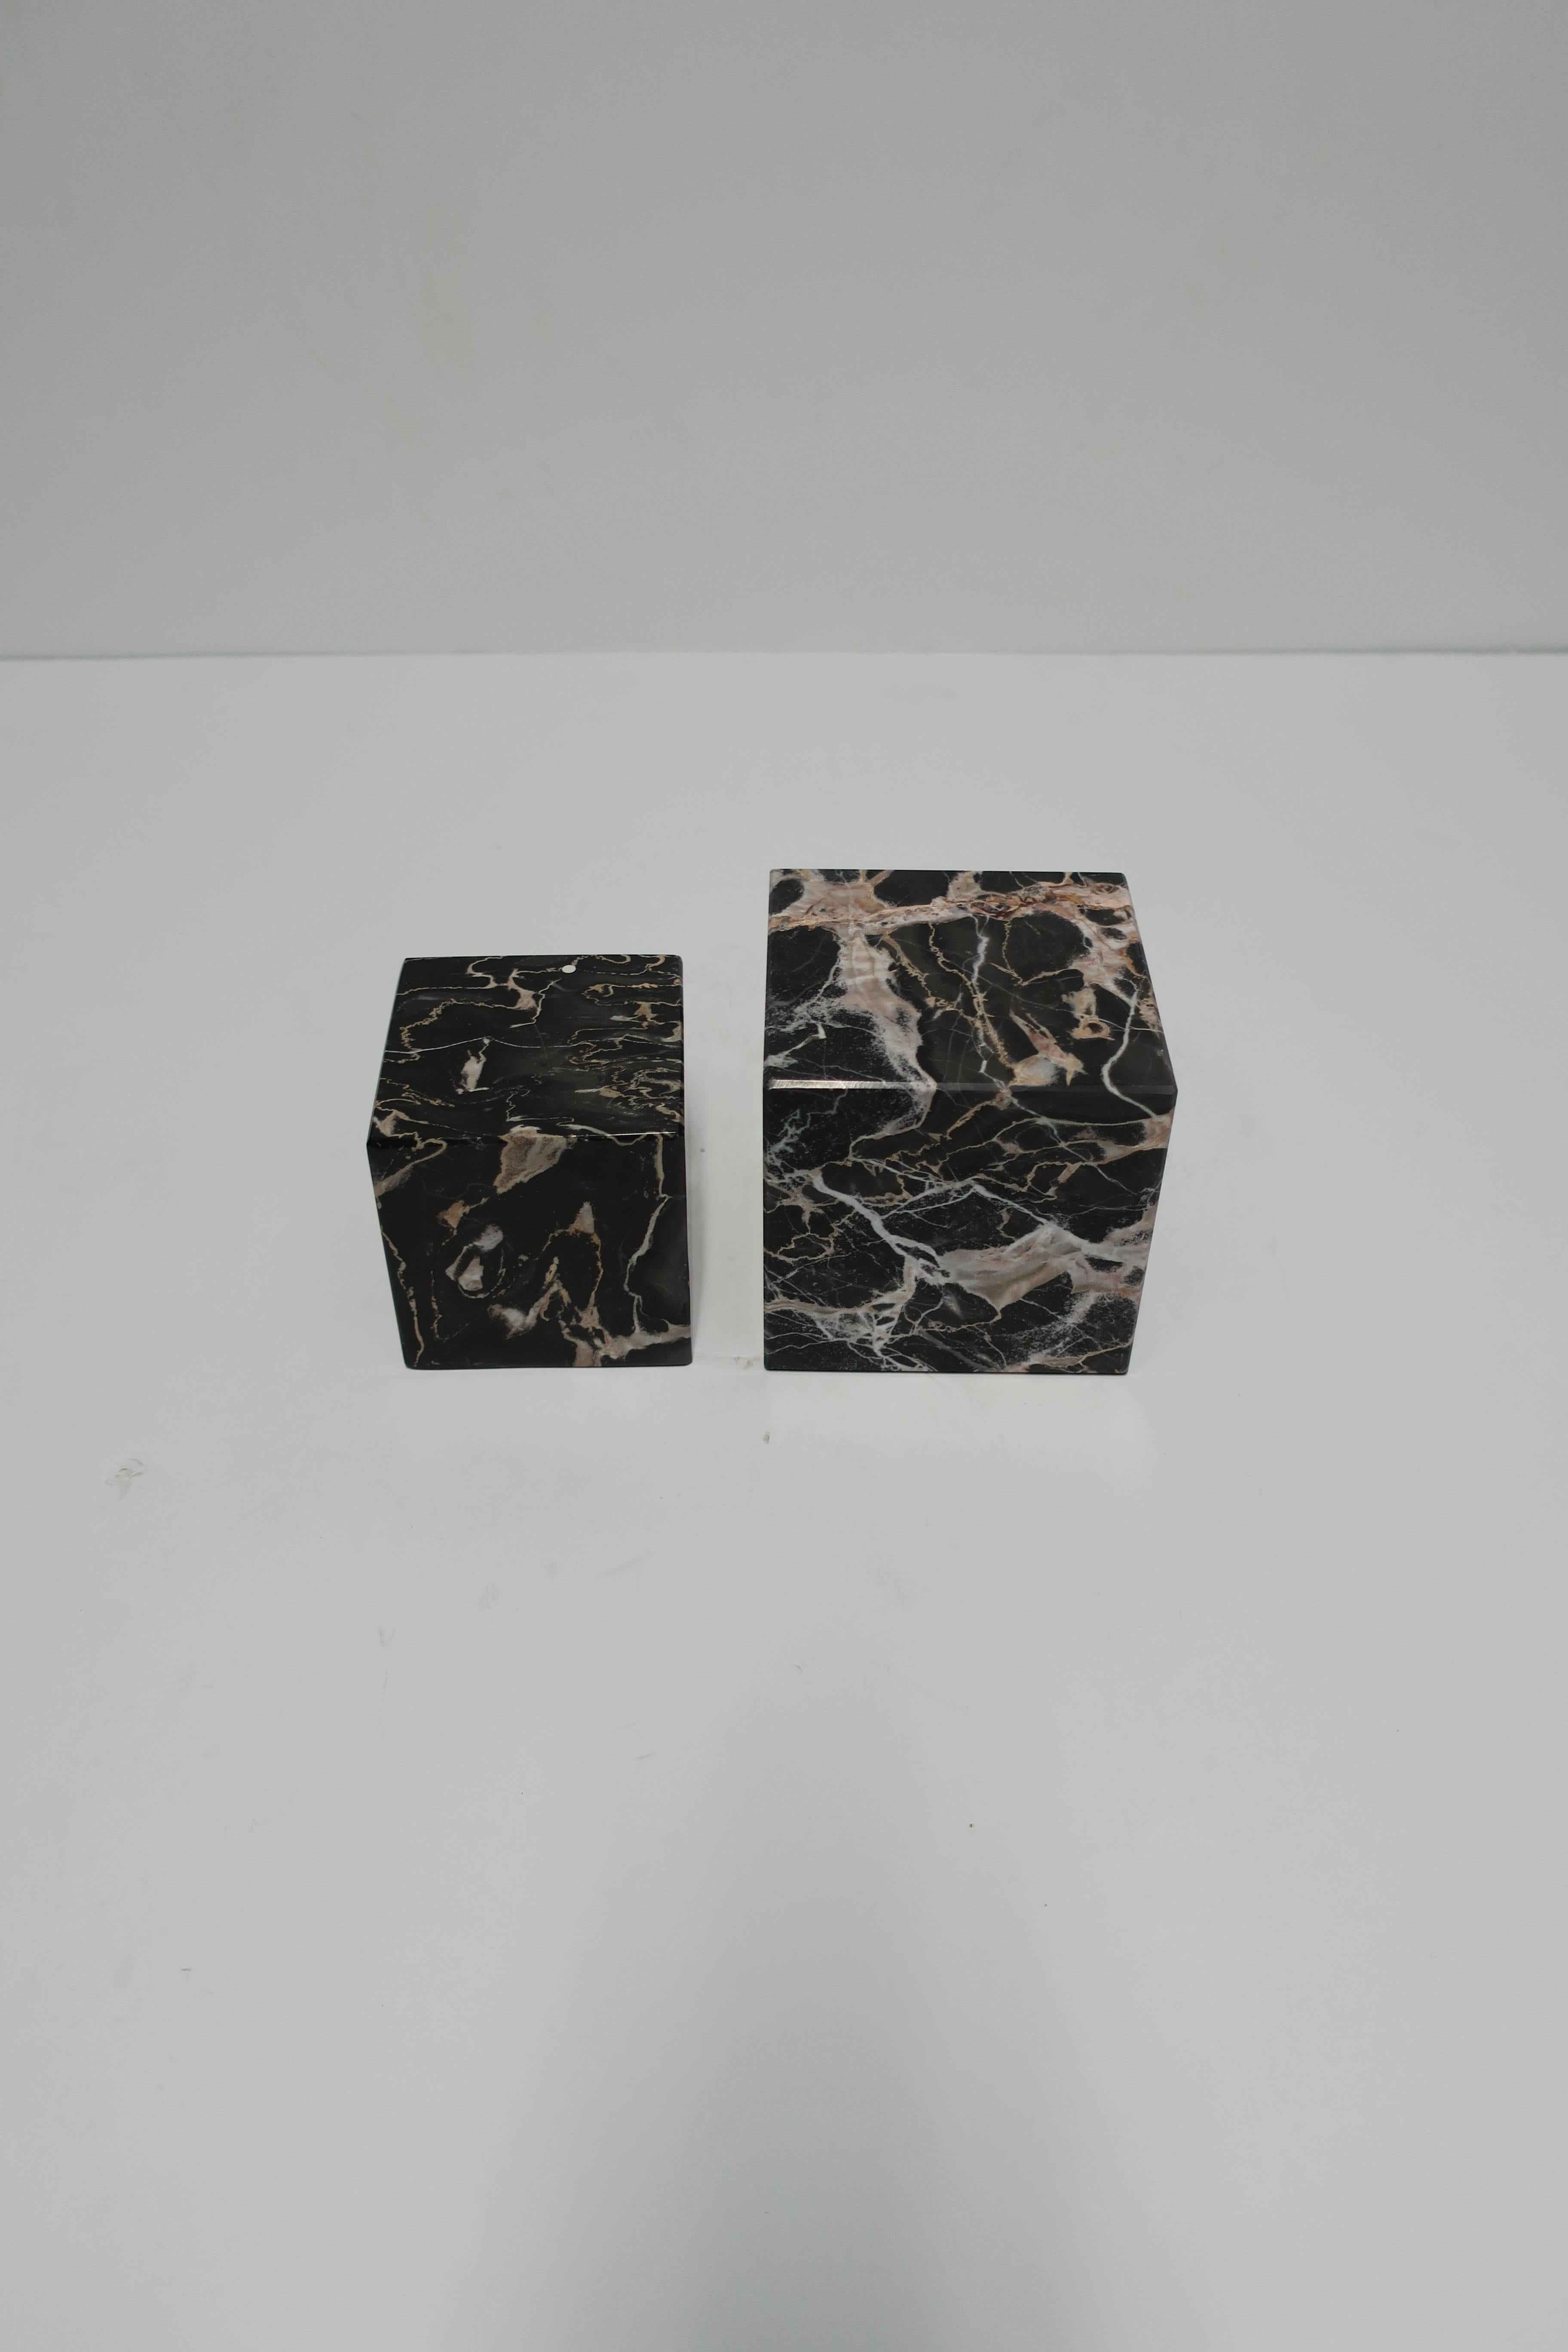 Italian Pair of Vintage Black and White Marble Bookends or Pedestals